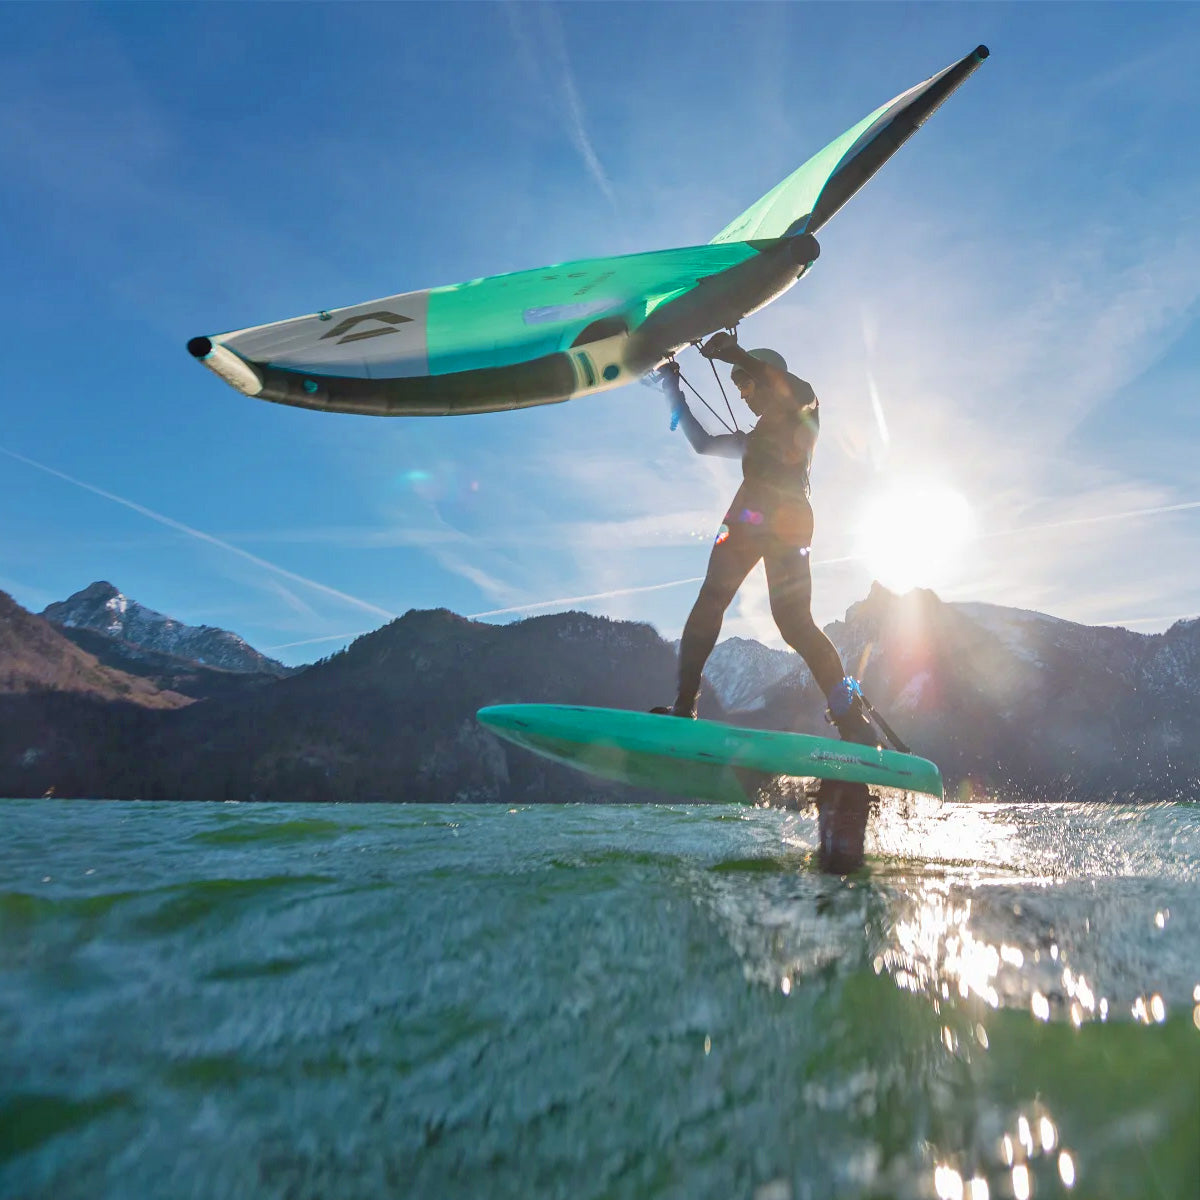 ION Rogue Foil Wing Harness - SUP